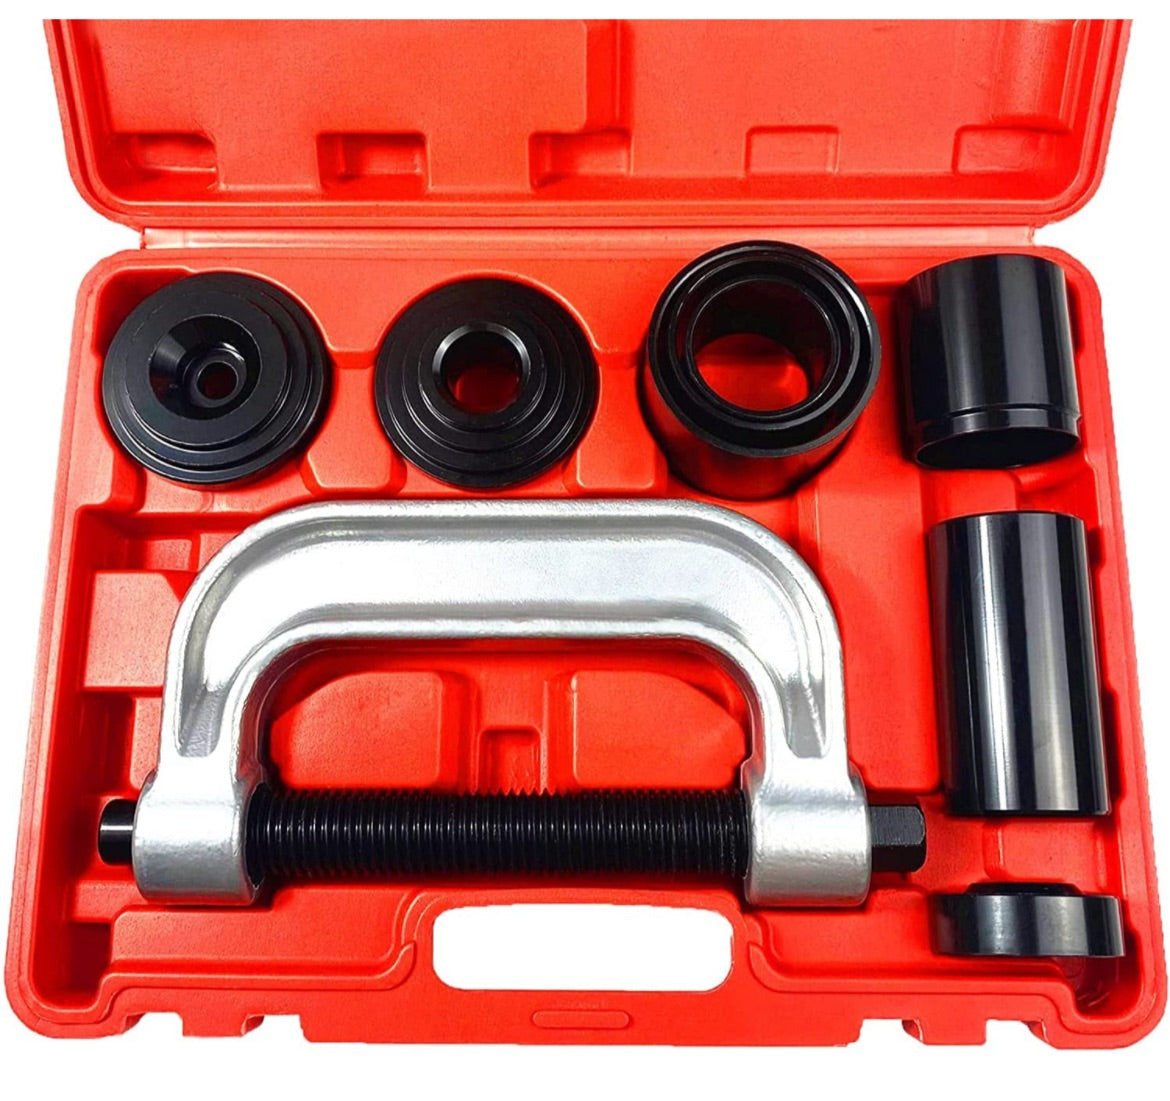 10 Pc Heavy Duty Ball Joint Press Remover Installer Tool & U Joint Removal Tool Kit with 4x4 Adapters